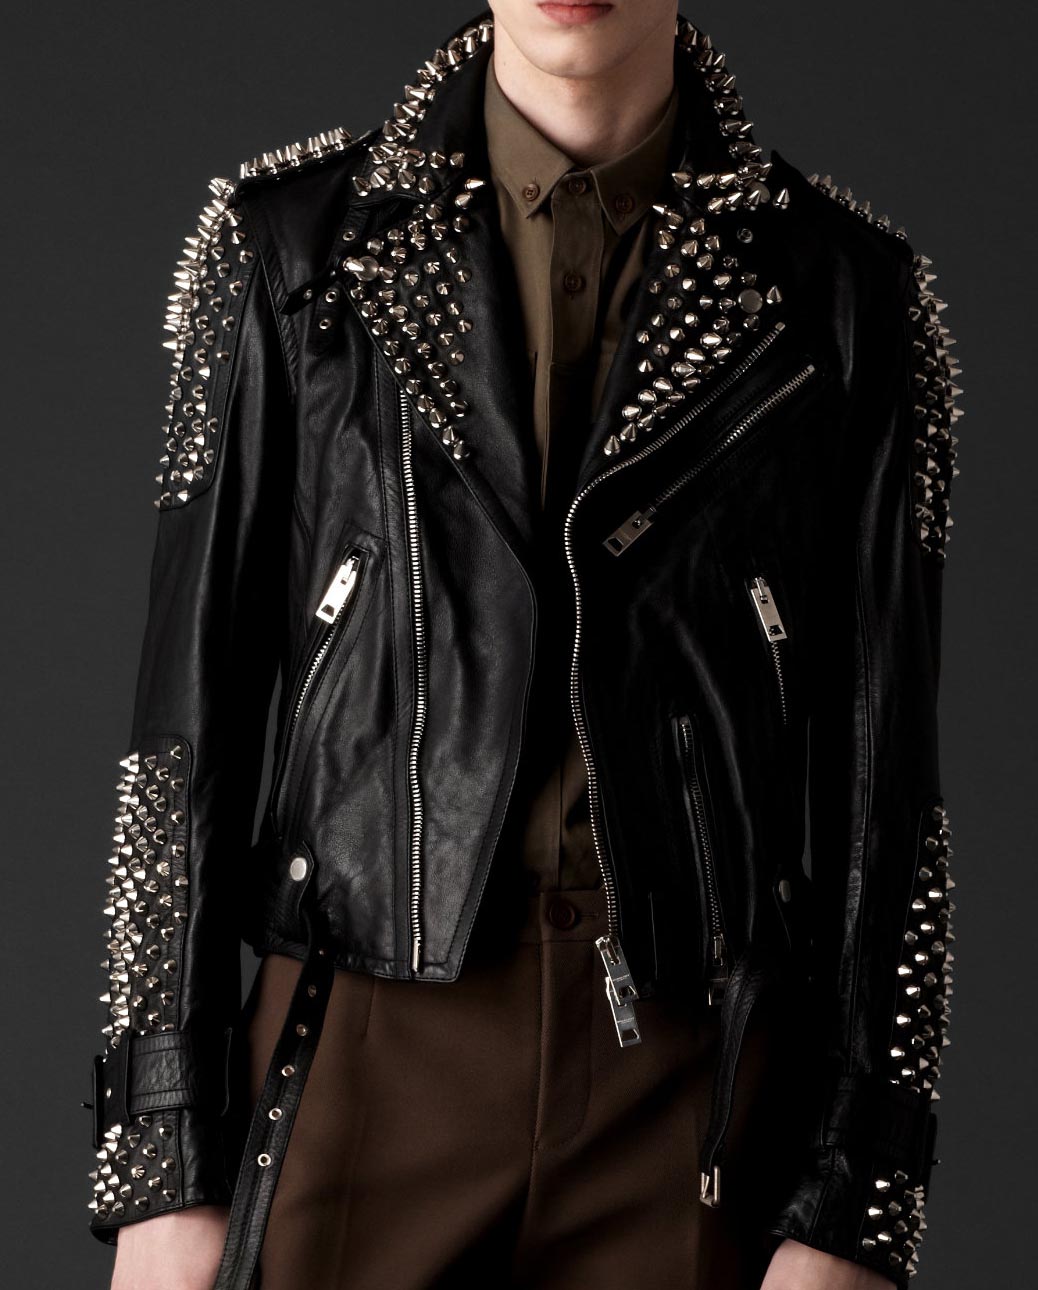 burberry spiked leather jacket